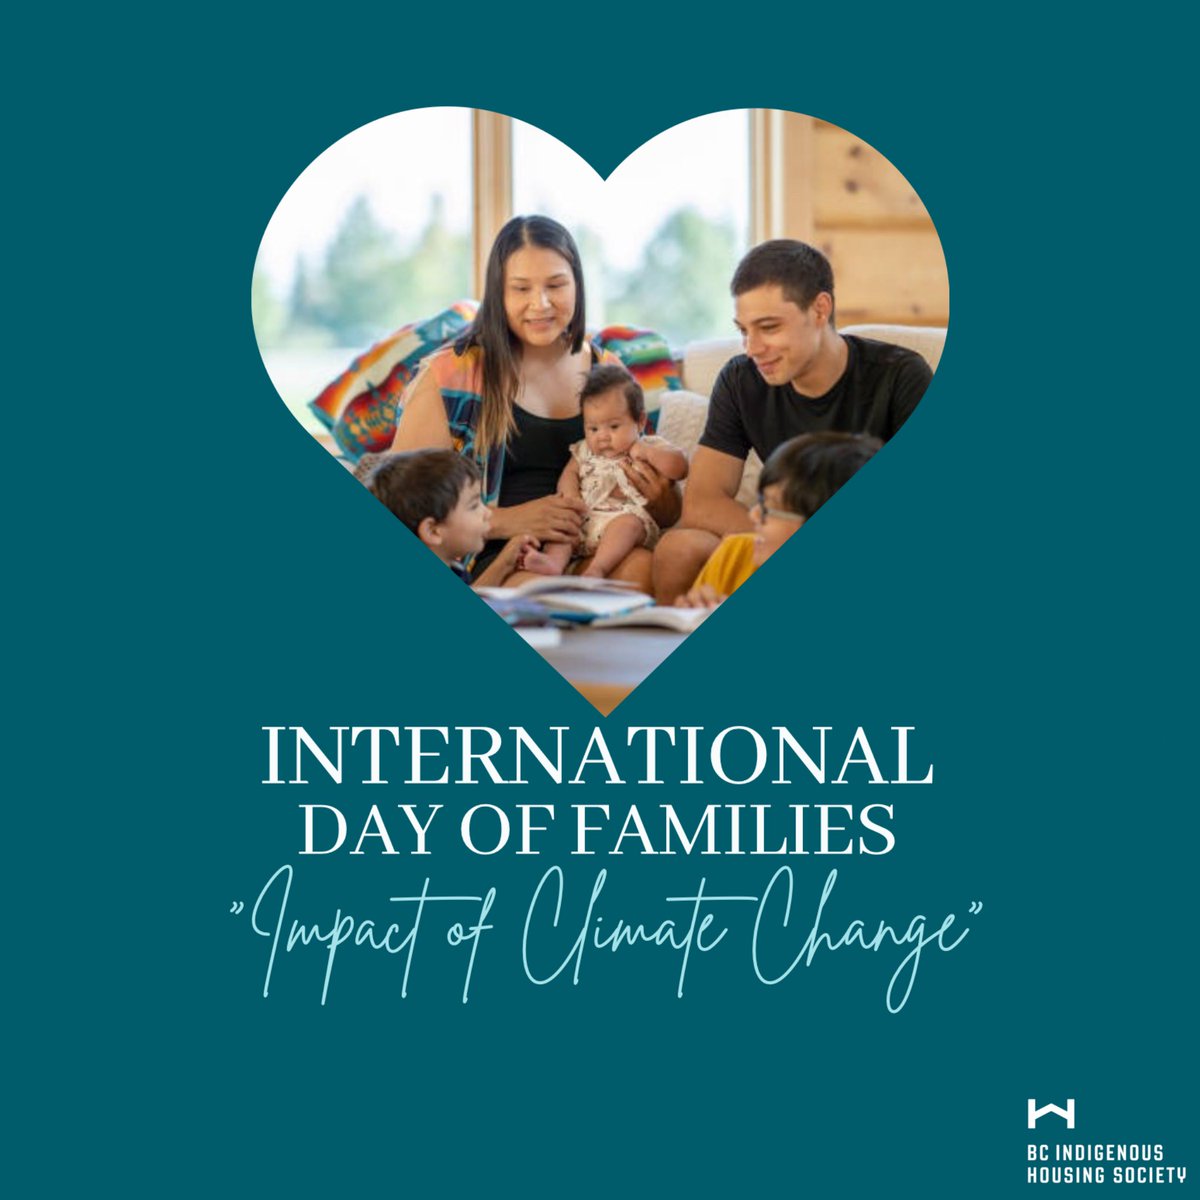 #internationaldayoffamiles

Let’s raise awareness and foster climate action together, ensuring our families thrive in a healthy and sustainable environment.

 #SustainableFuture #IndigenousFamilies #BCIHS #CommunityStrength #bcindigenoushousing #bchousing #indigenous